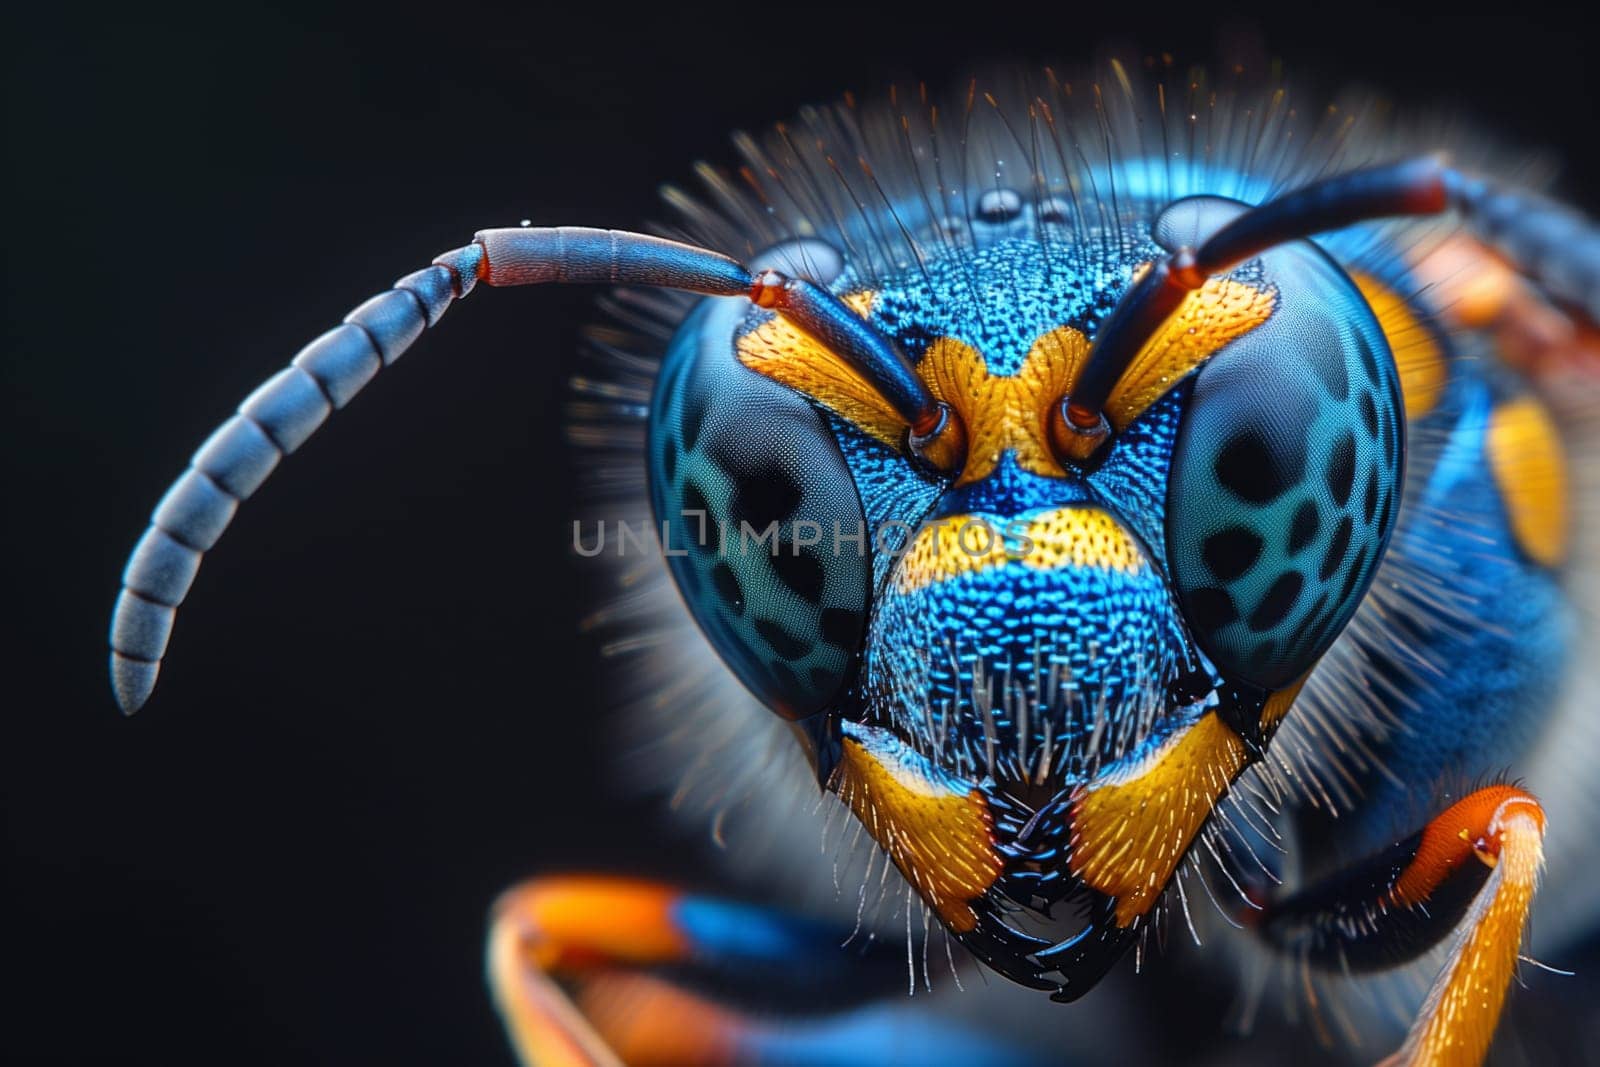 Macro photograph of an electric blue wasp head on a black background by richwolf